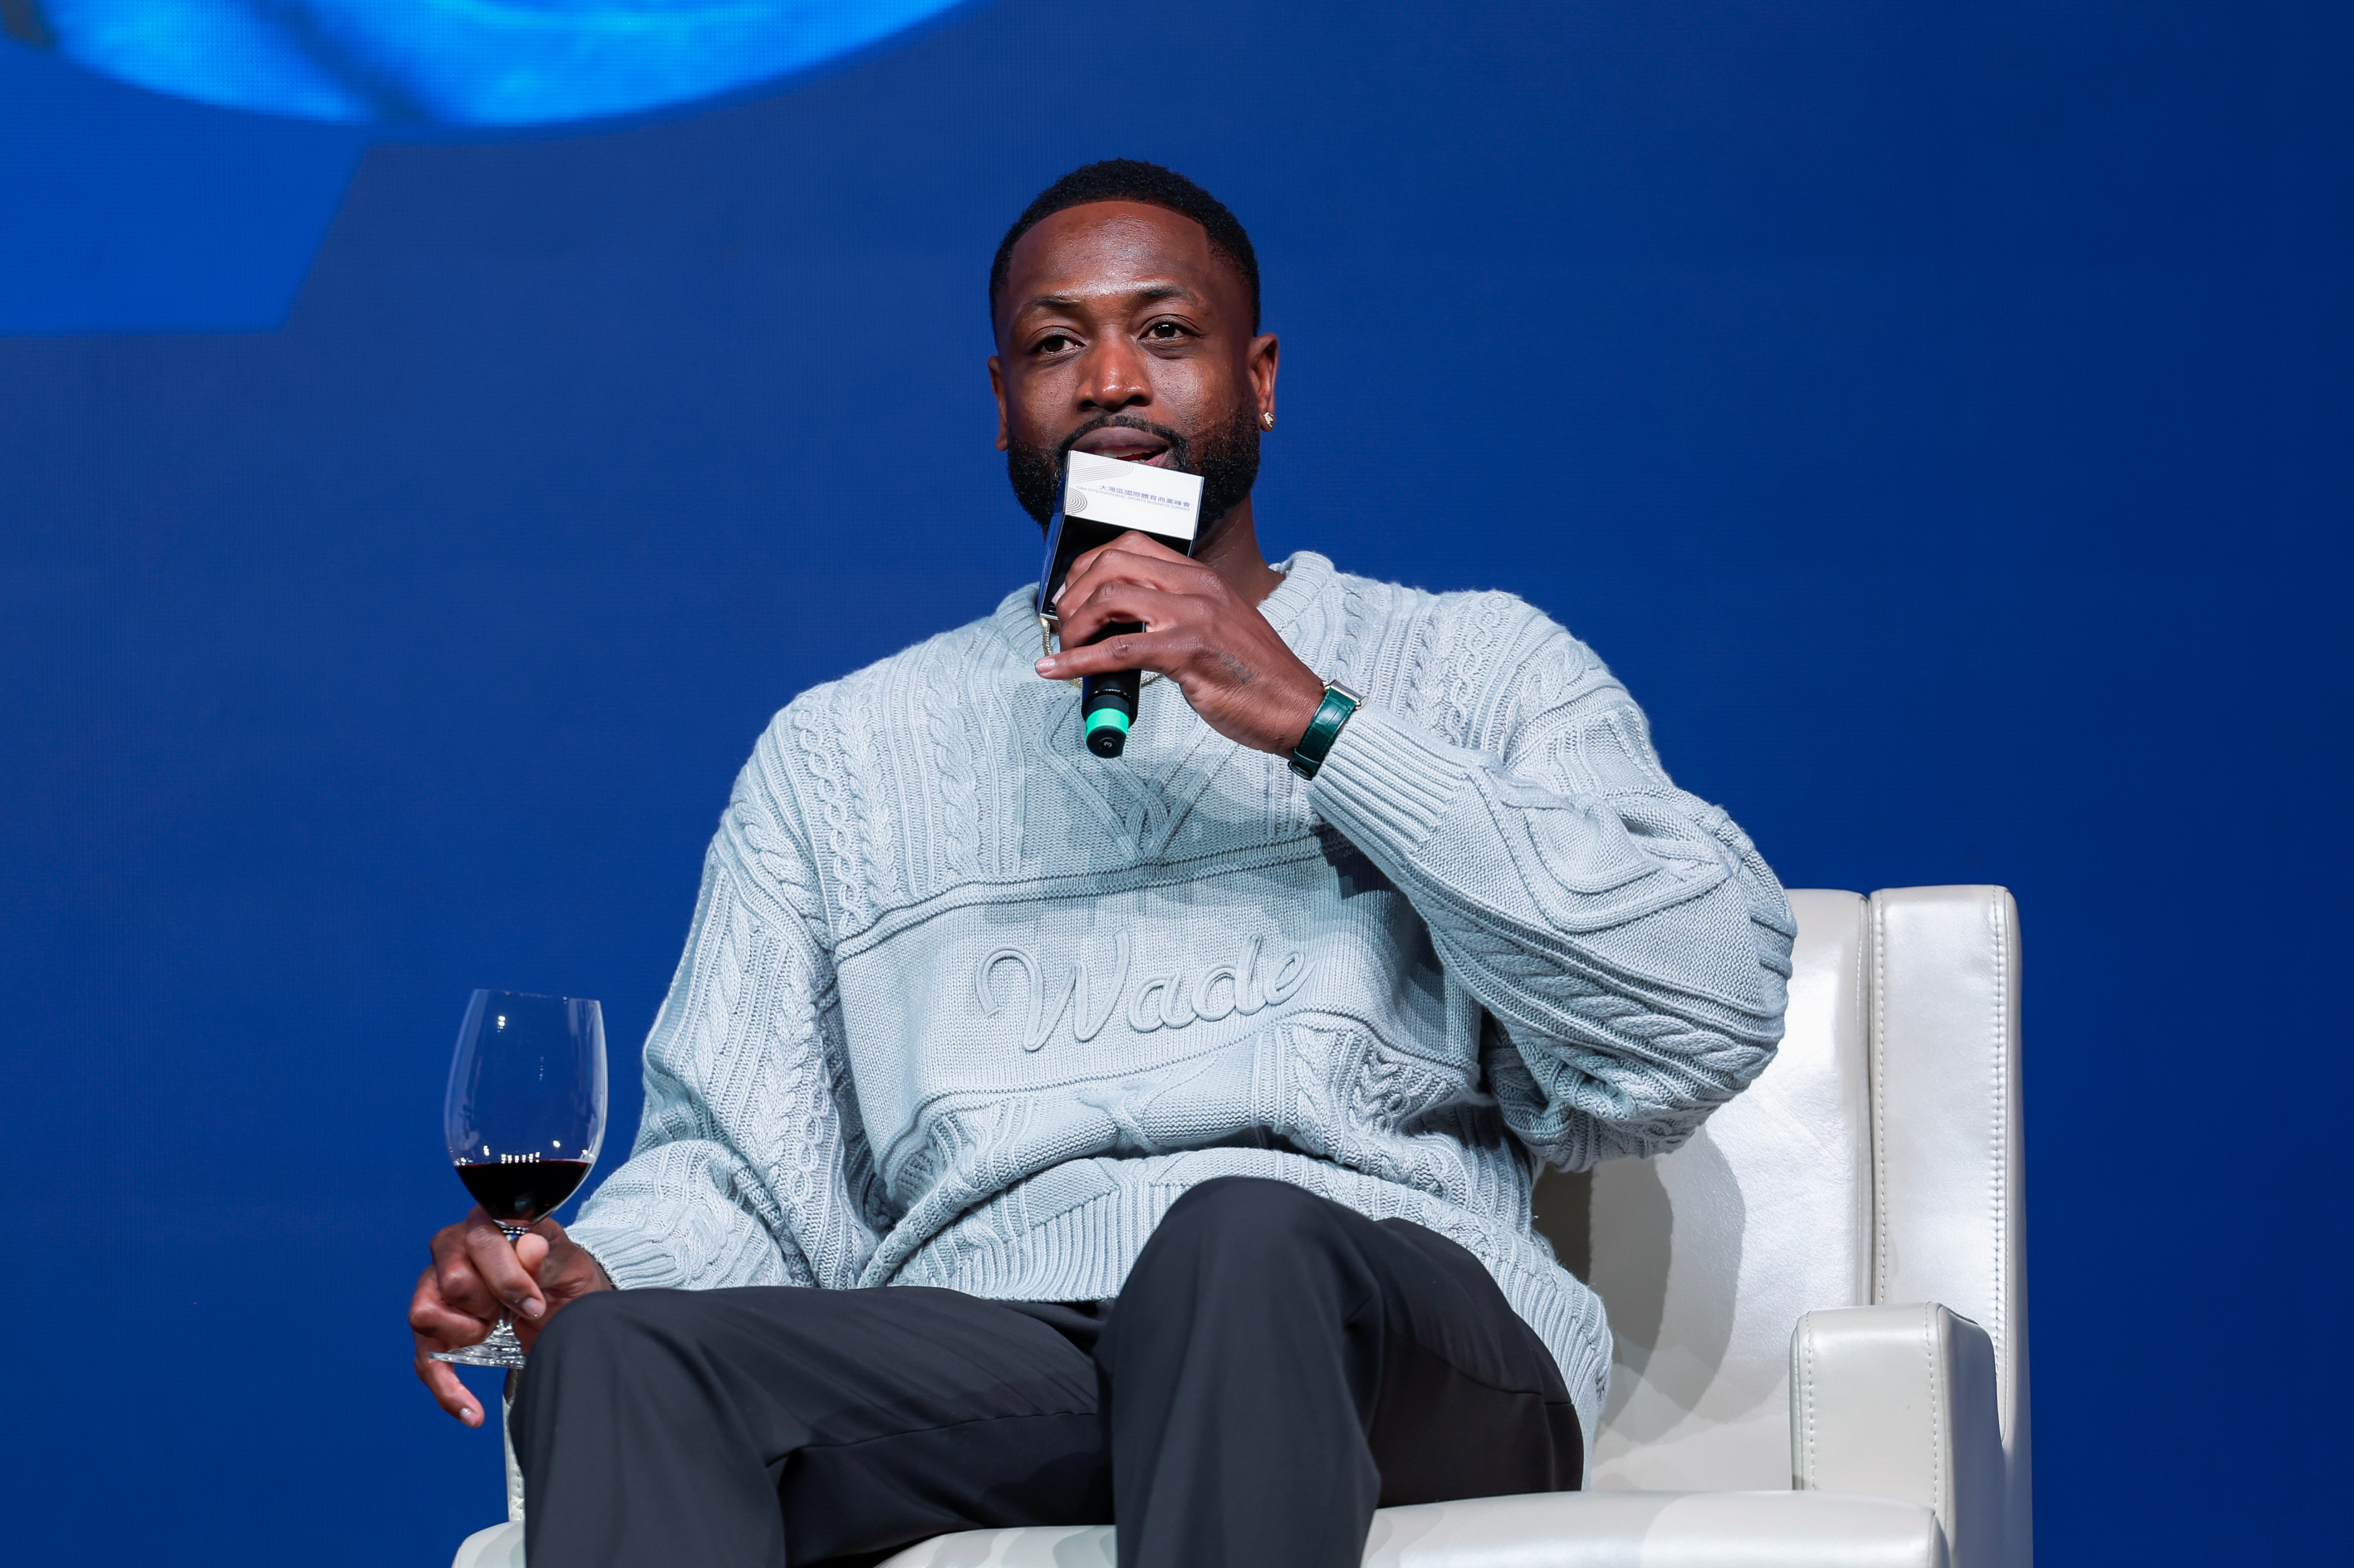 Dwyane Wade speaks during a panel discussion at the GBA International Sports Business Summit. Photo: Handout